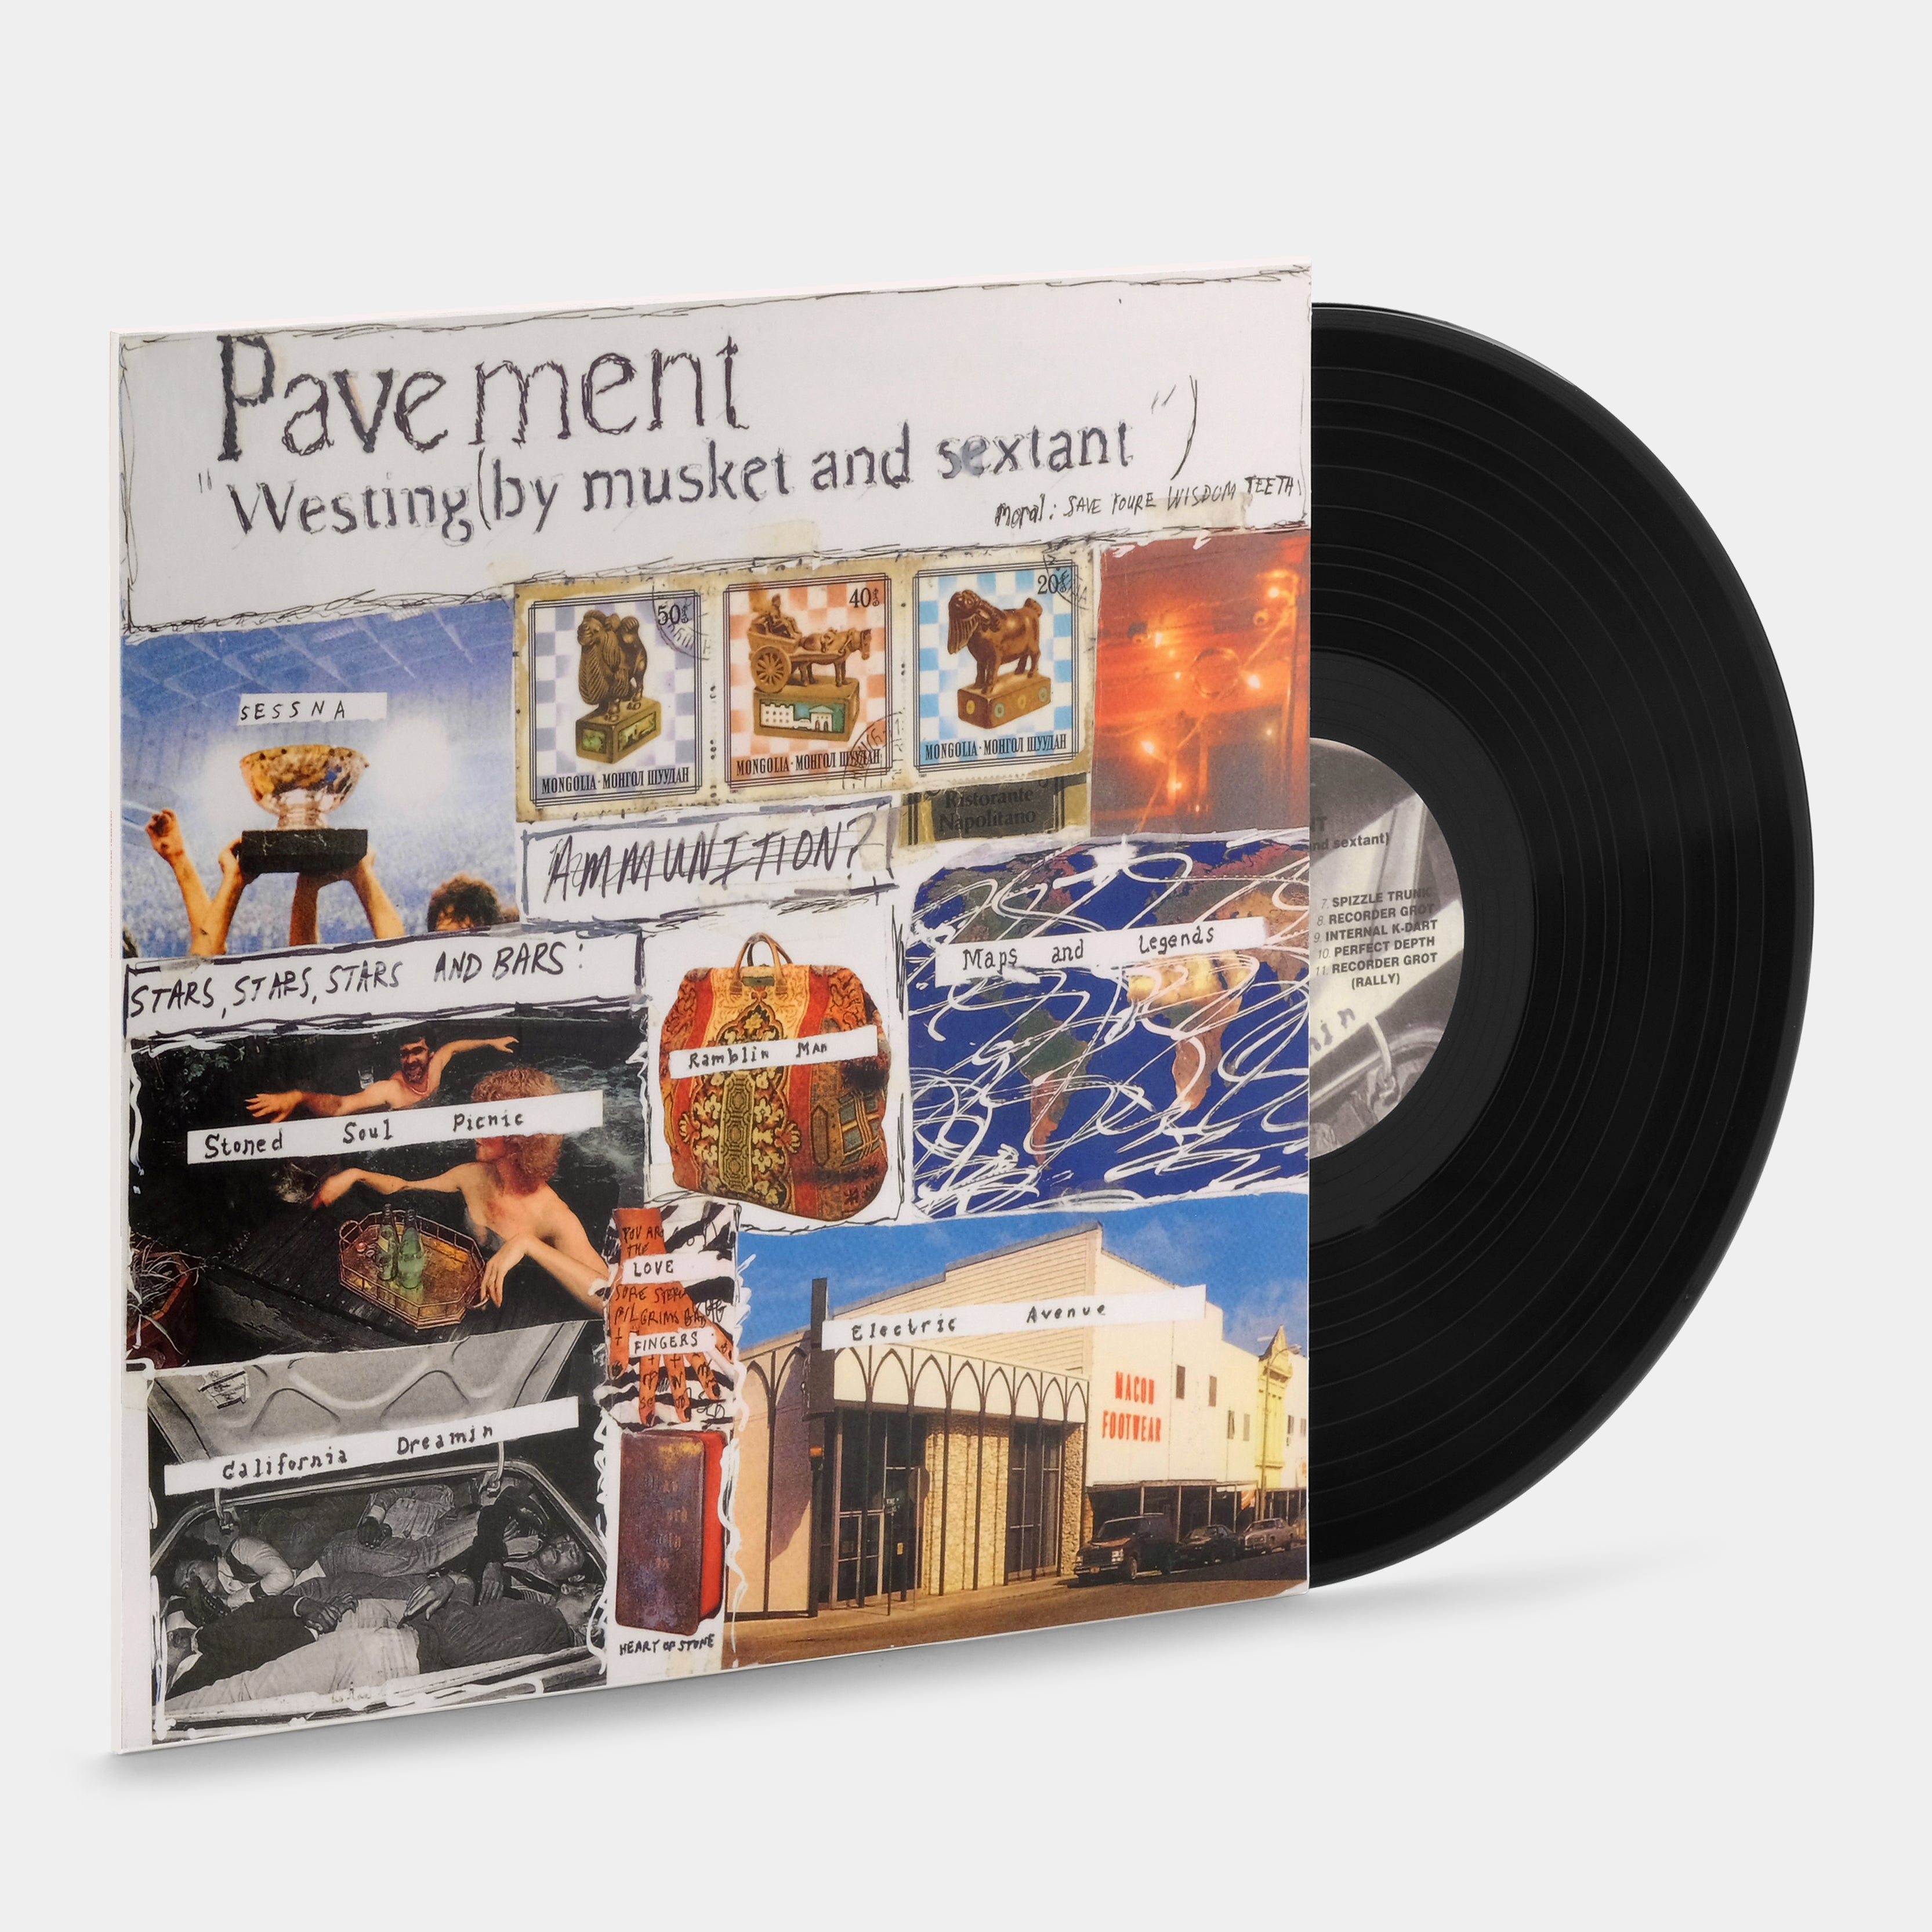 Pavement - Westing (by Musket And Sextant) LP Vinyl Record